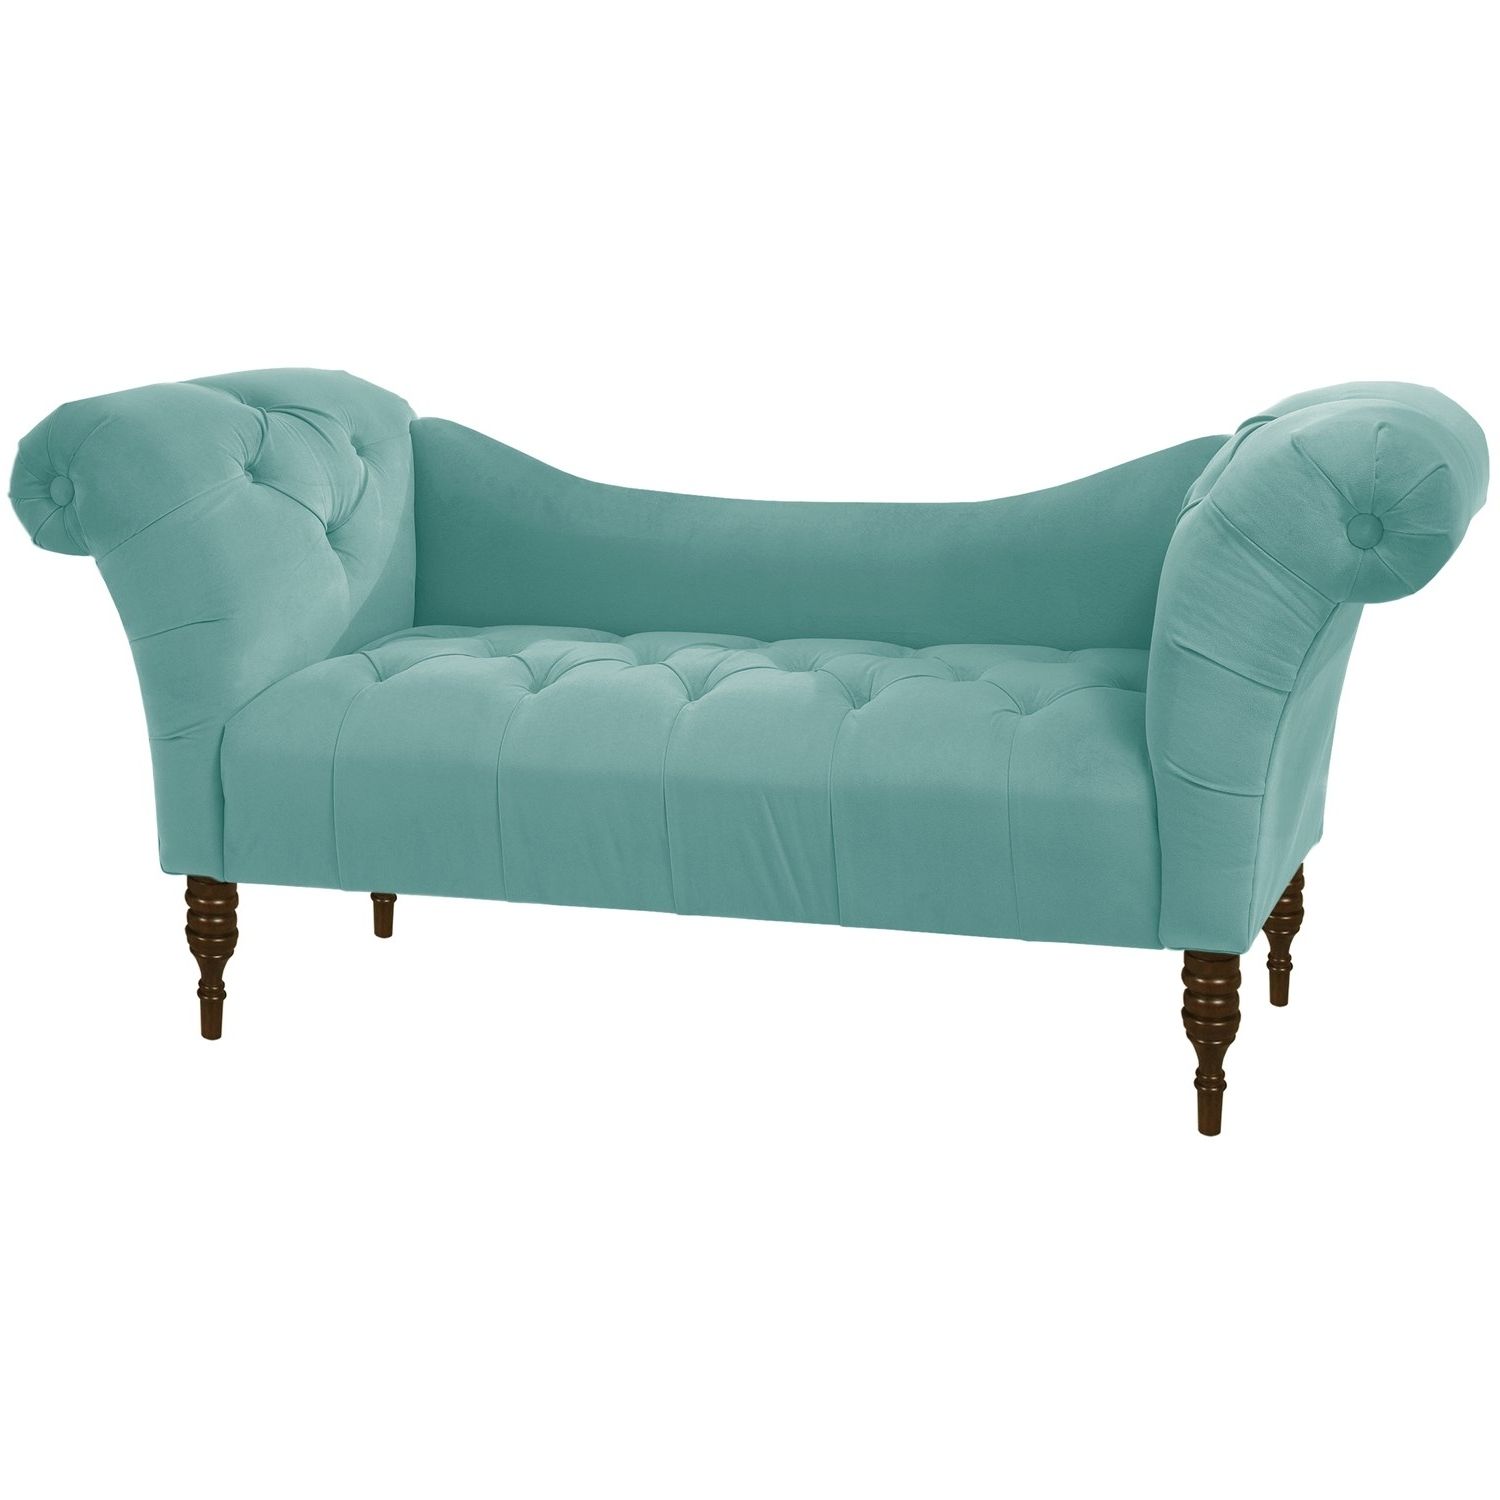 Well Known Tufted Chaise Lounges Intended For Skyline 6006vlv Tufted Chaise Lounge – Homeclick (View 12 of 15)